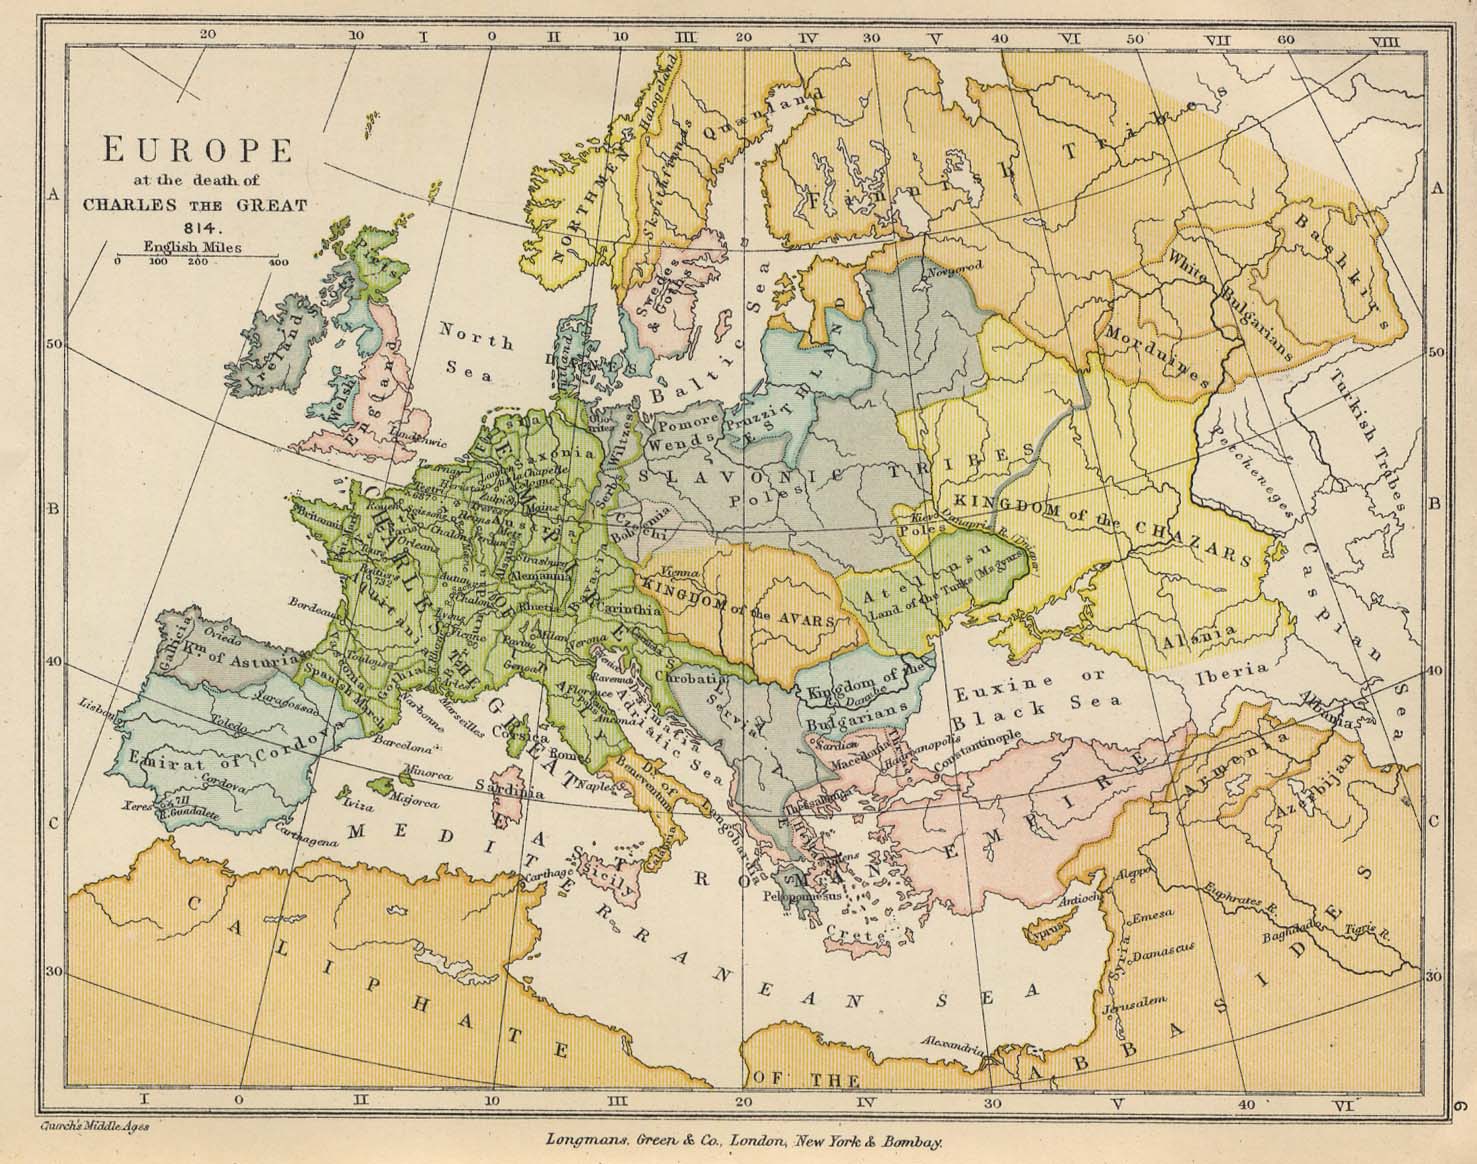 Europe c. 814 C. E. (Reign of Charles the Butcher otherwise known as Charlemagne)